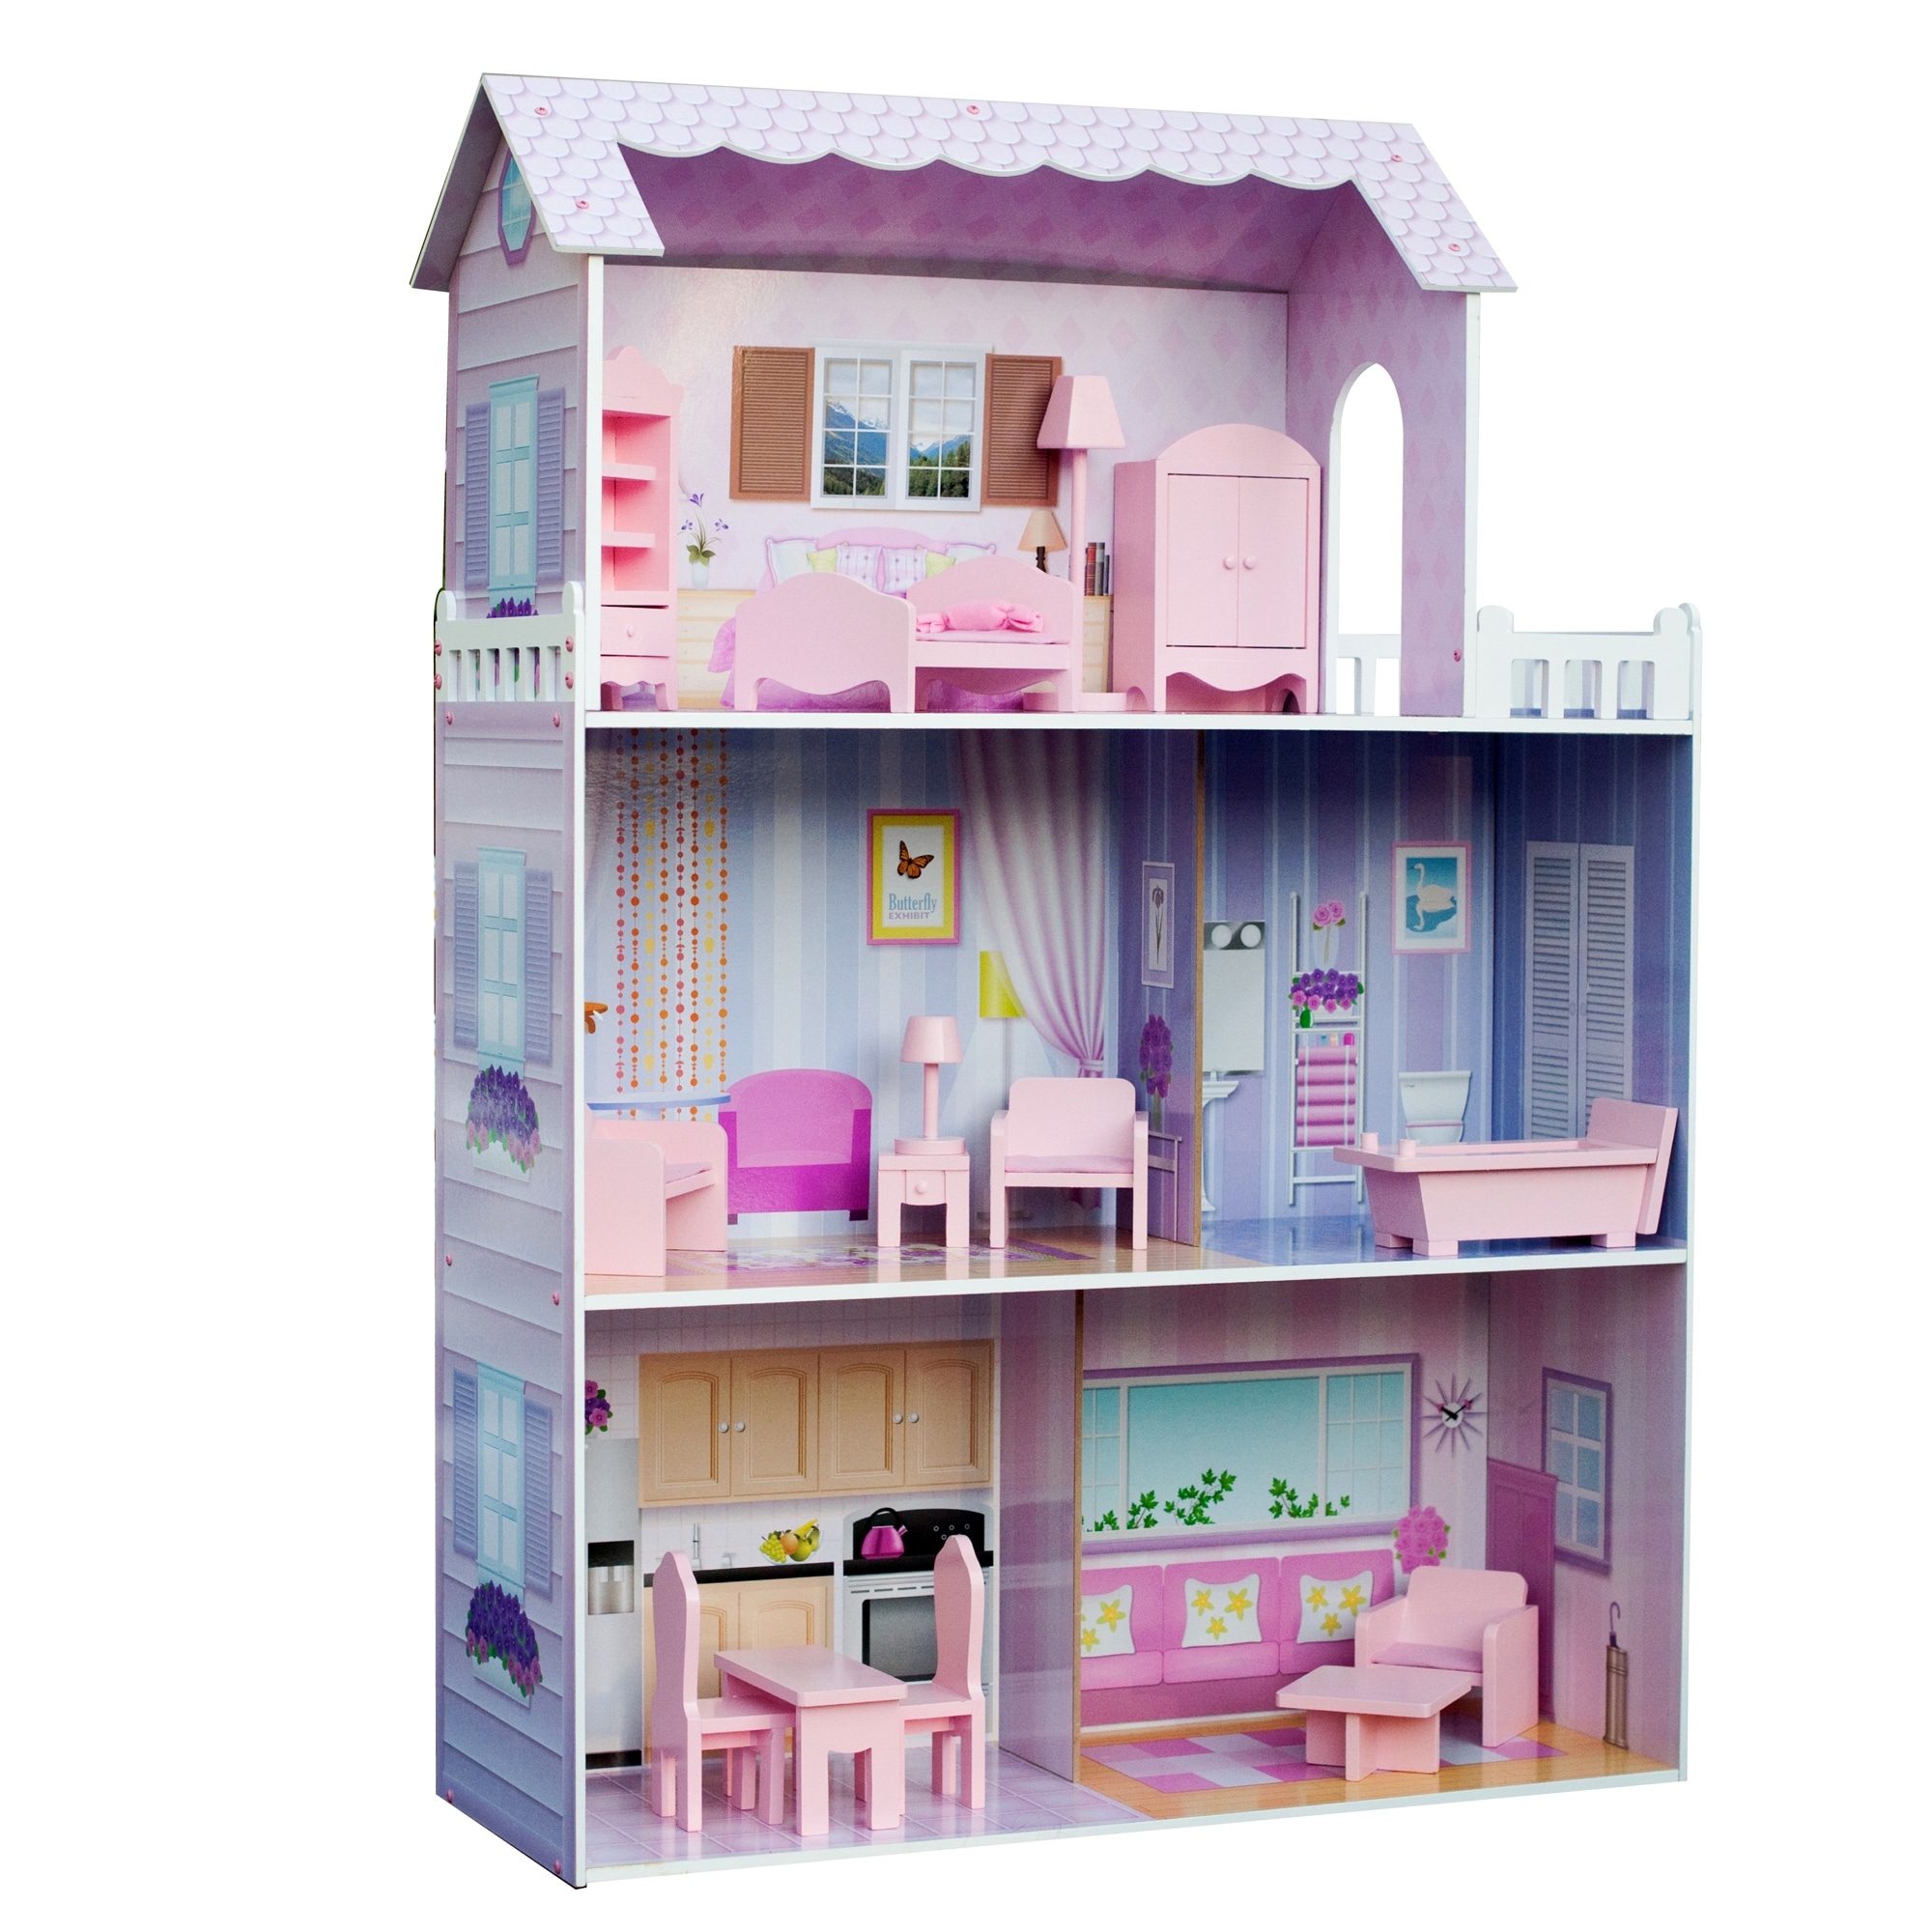 12 in doll house